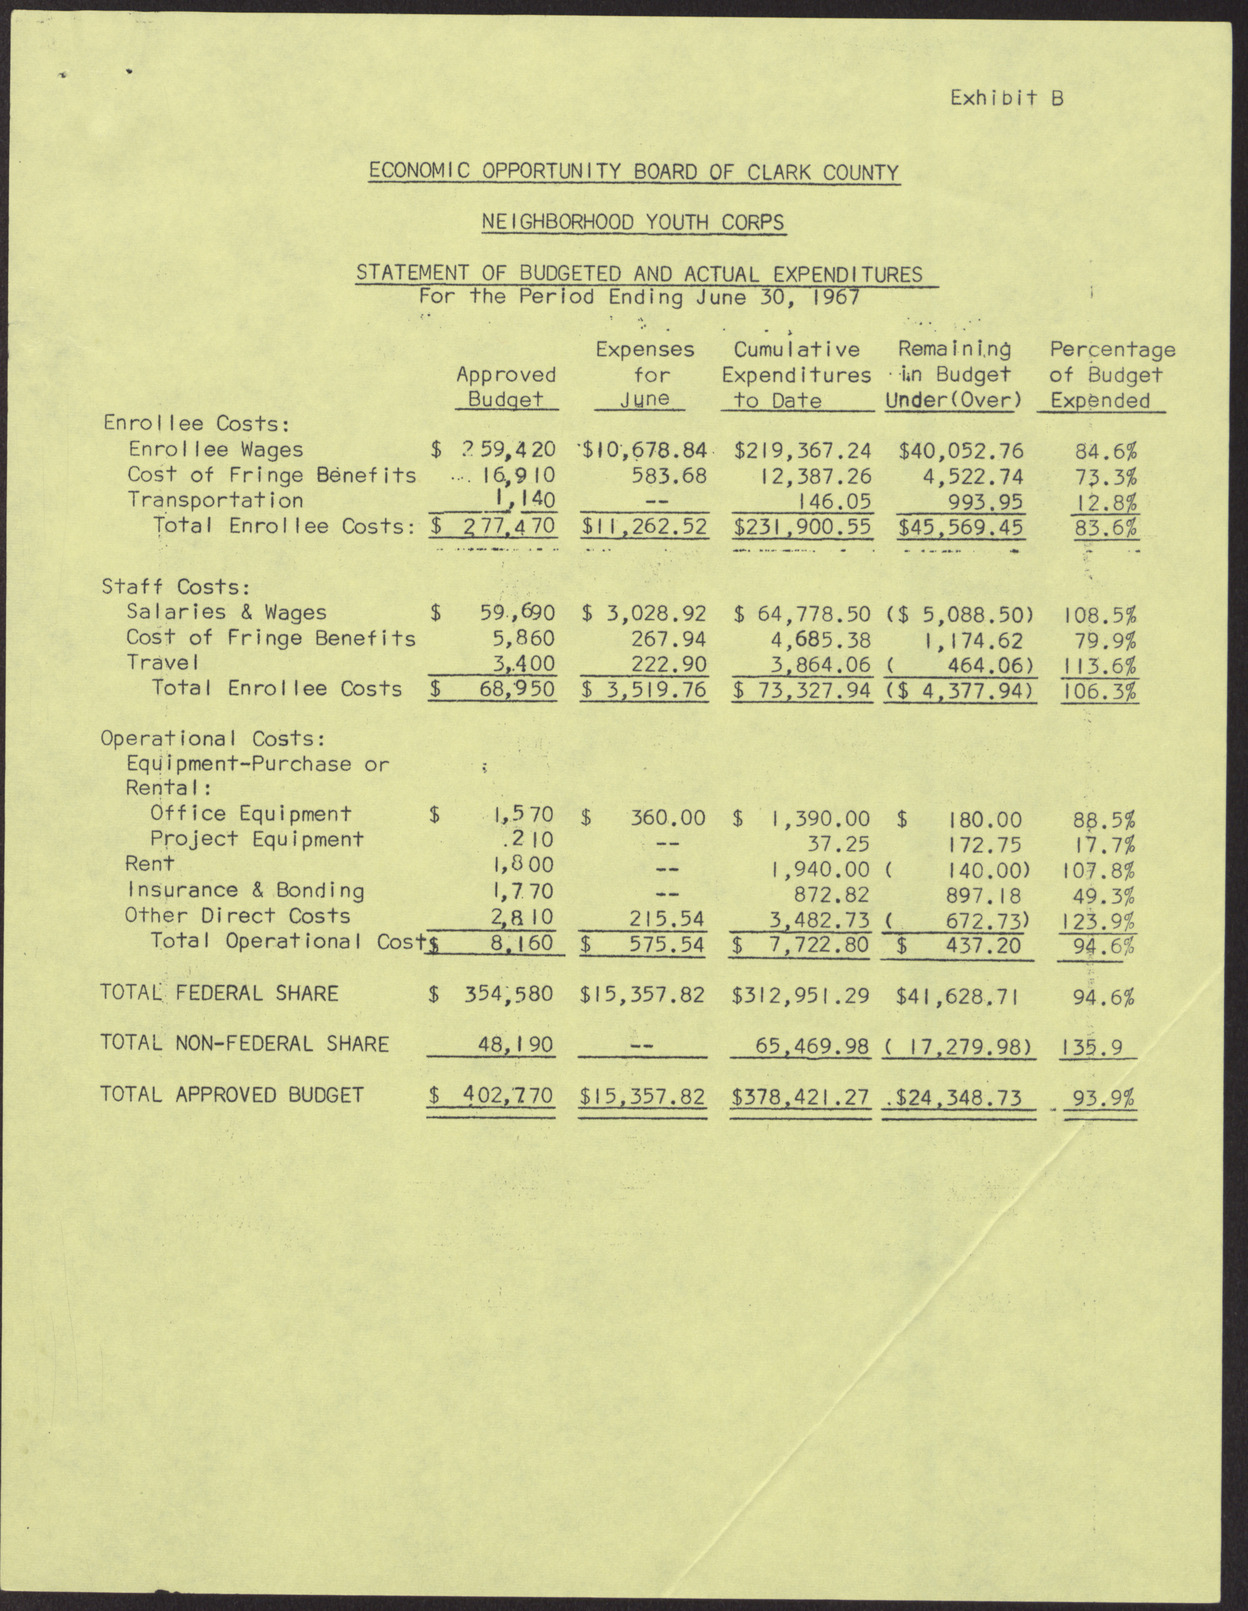 Economic Opportunity Board of Clark County Neighborhood Youth Corps Financial Position, Statement of Budgeted and Actual Expenditures, and Schedule of Checks Written (3 pages), June 30, 1967, page 2